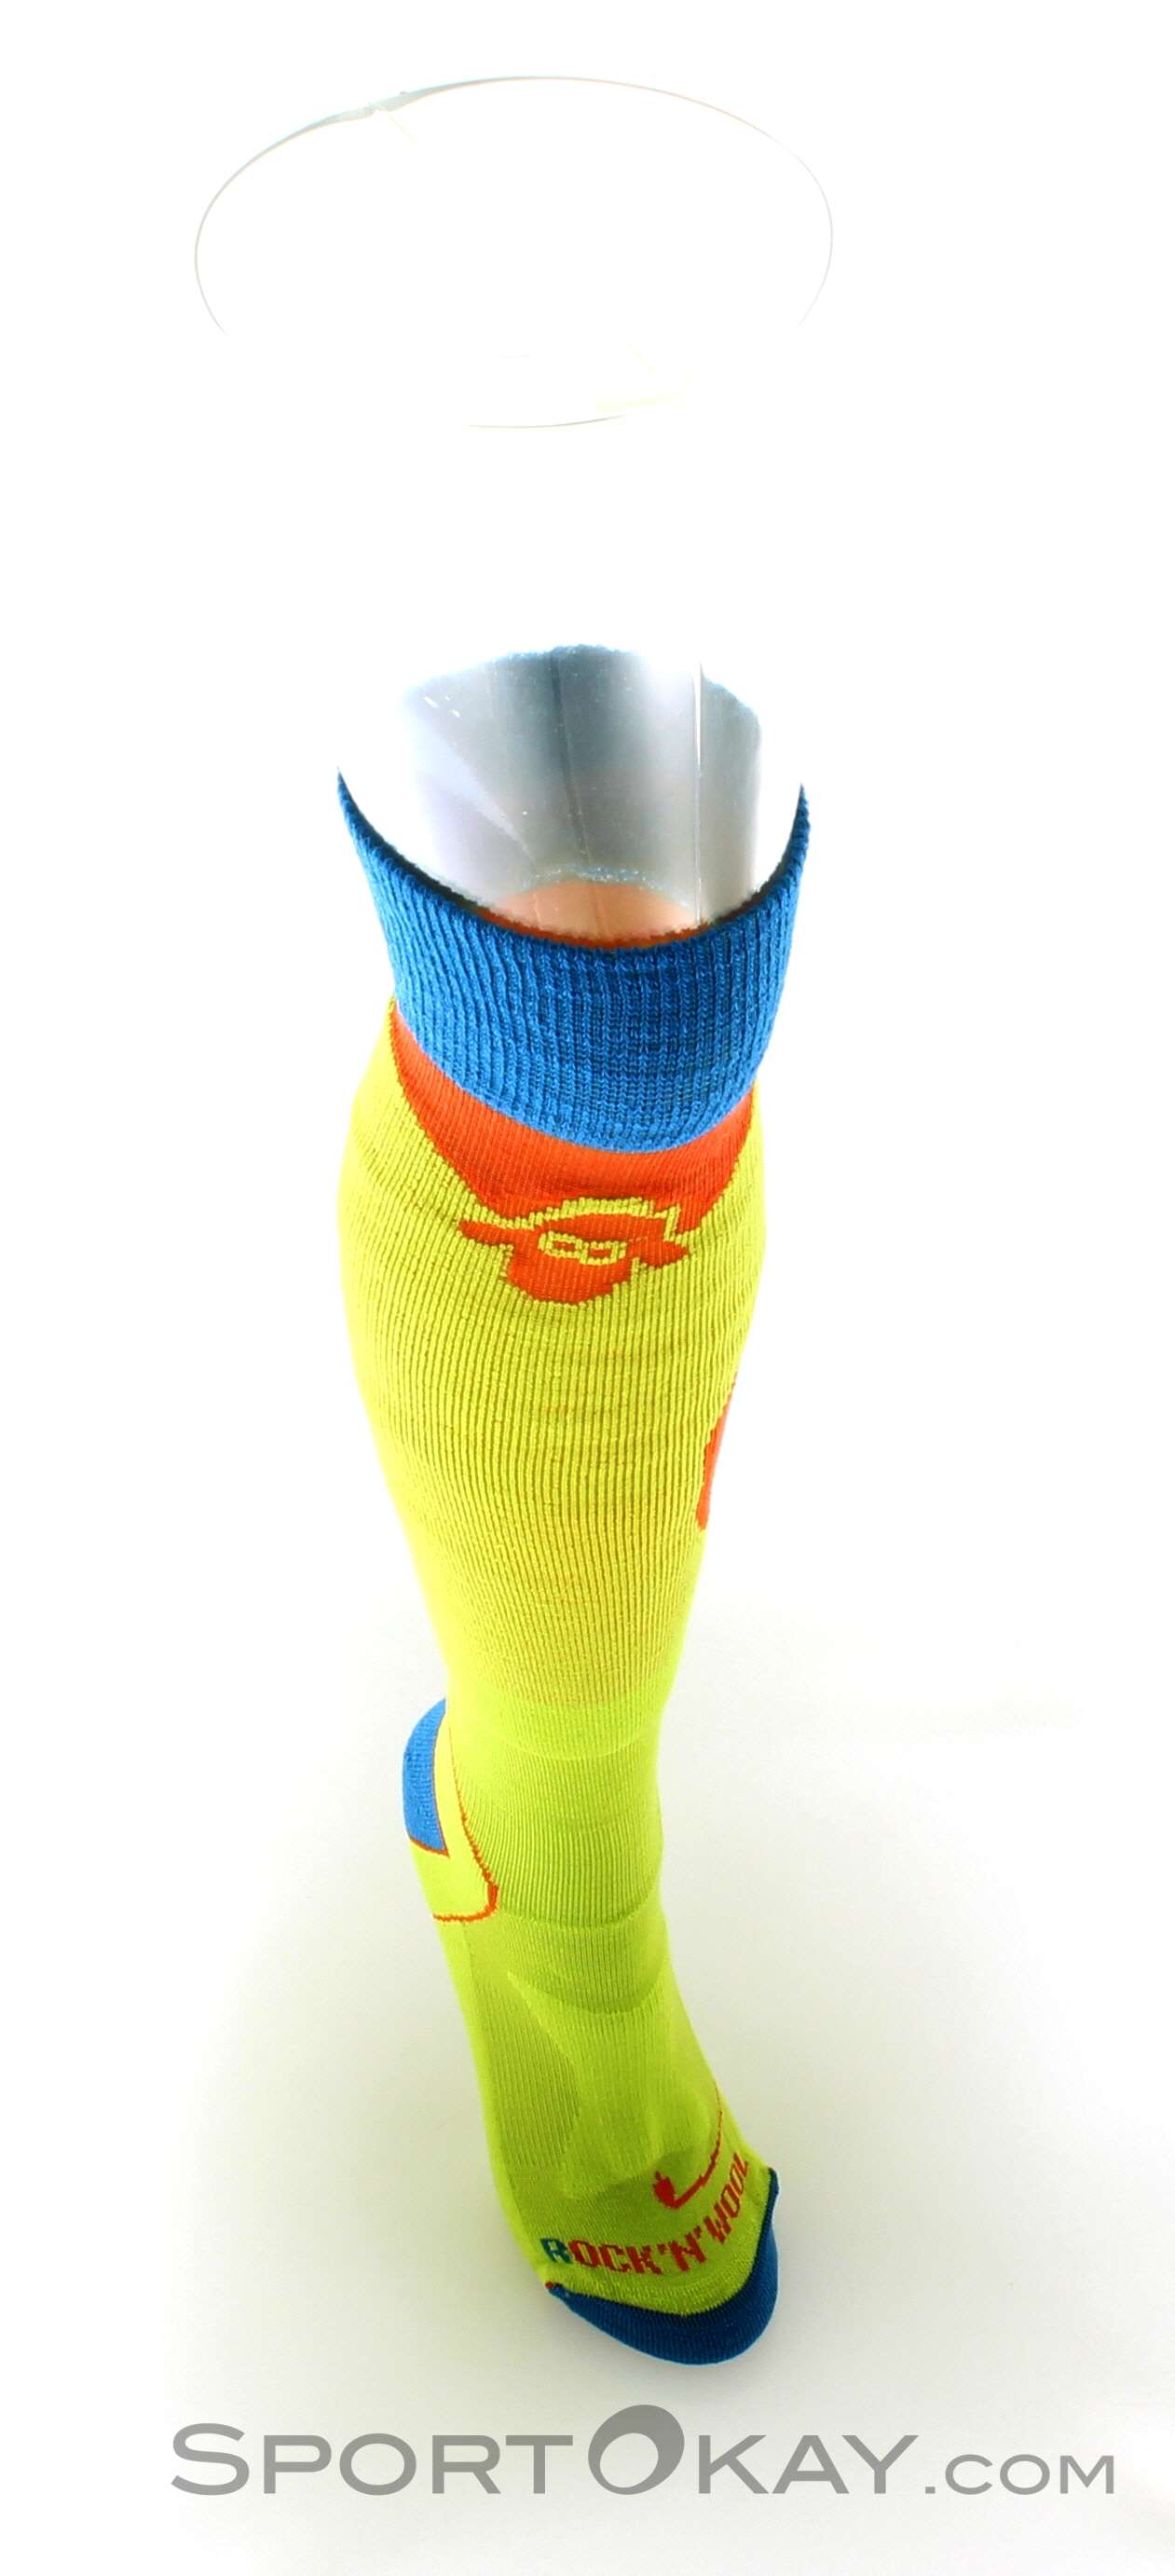 ORTOVOX Ortovox SKI ROCK'N'WOOL - Calcetines hombre pacific green - Private  Sport Shop